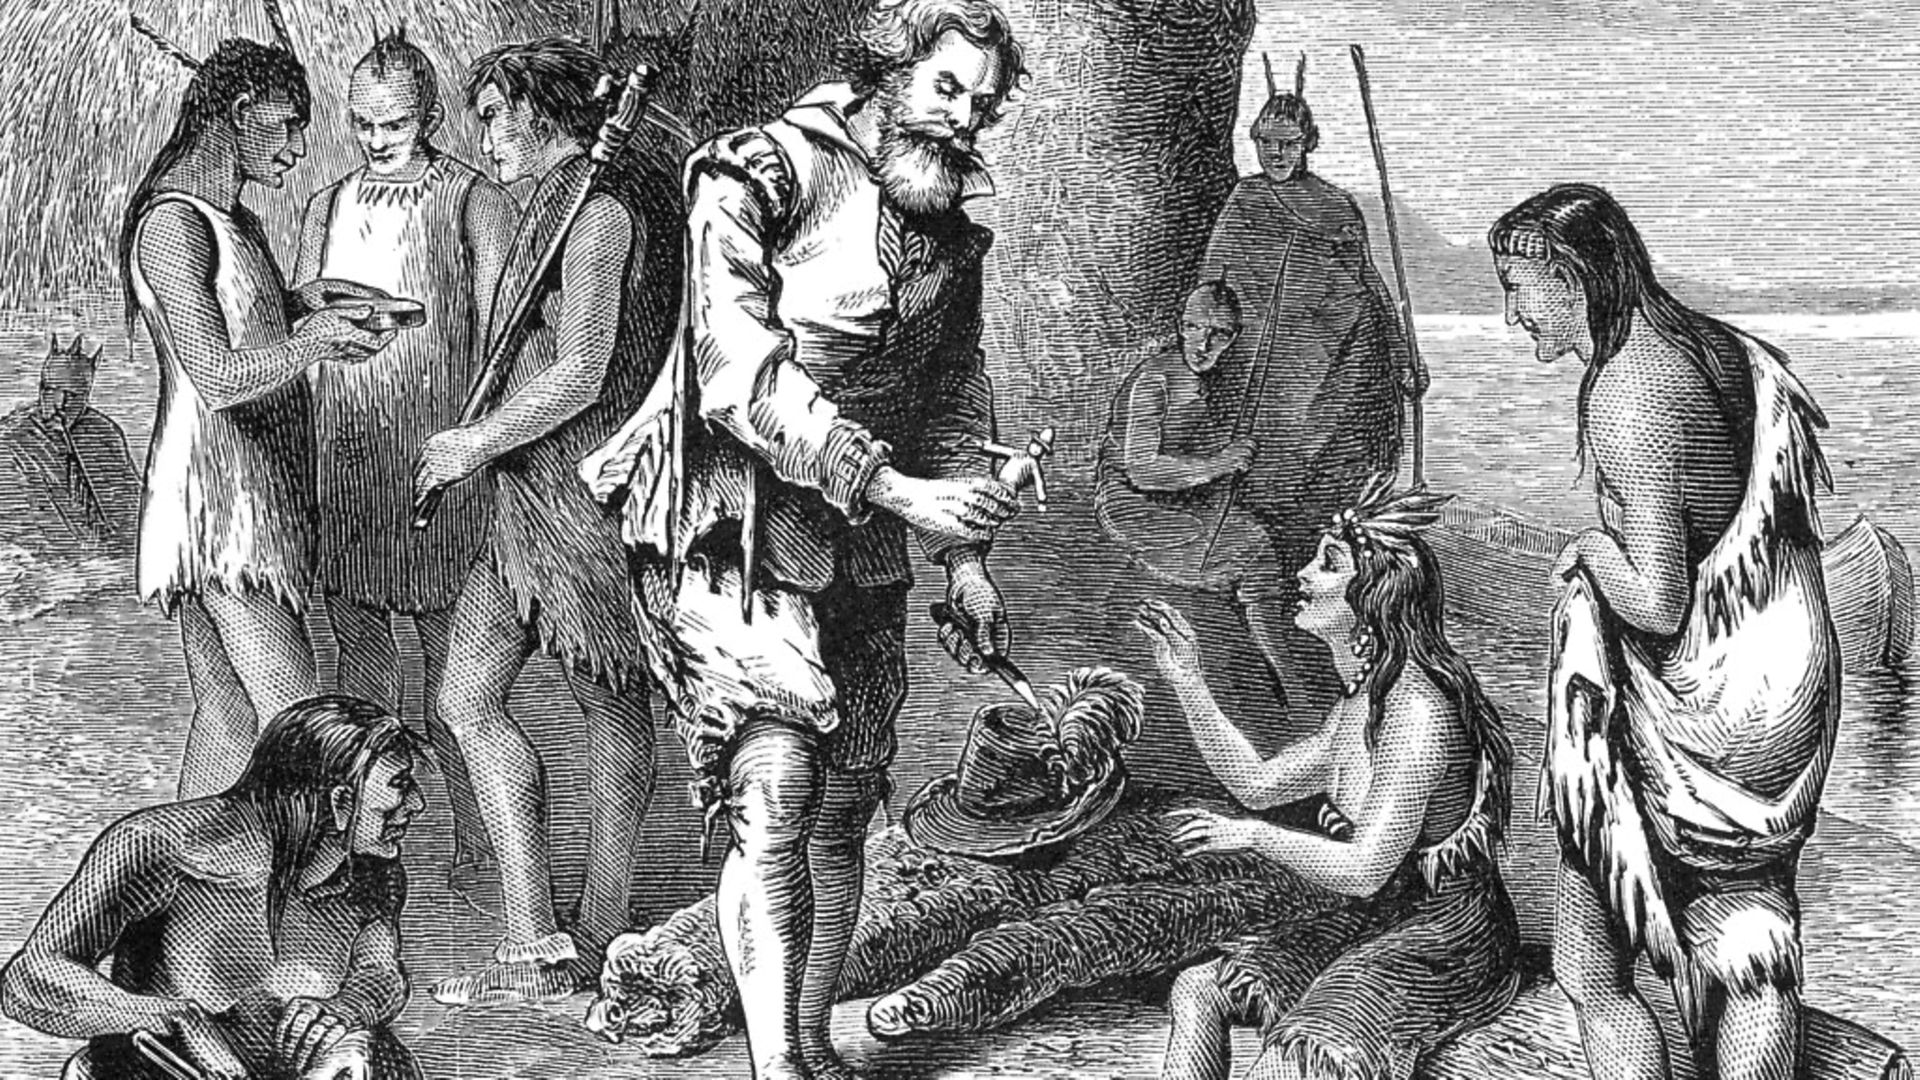 John Smith (1530-1631). English soldier, explorer, cartographer, colonial administrator. Captured in the Jamestown, Virginia colony by Chief Powhatan, saved by Pocahontas. Photo: Archive Photos/Getty Images - Credit: Getty Images